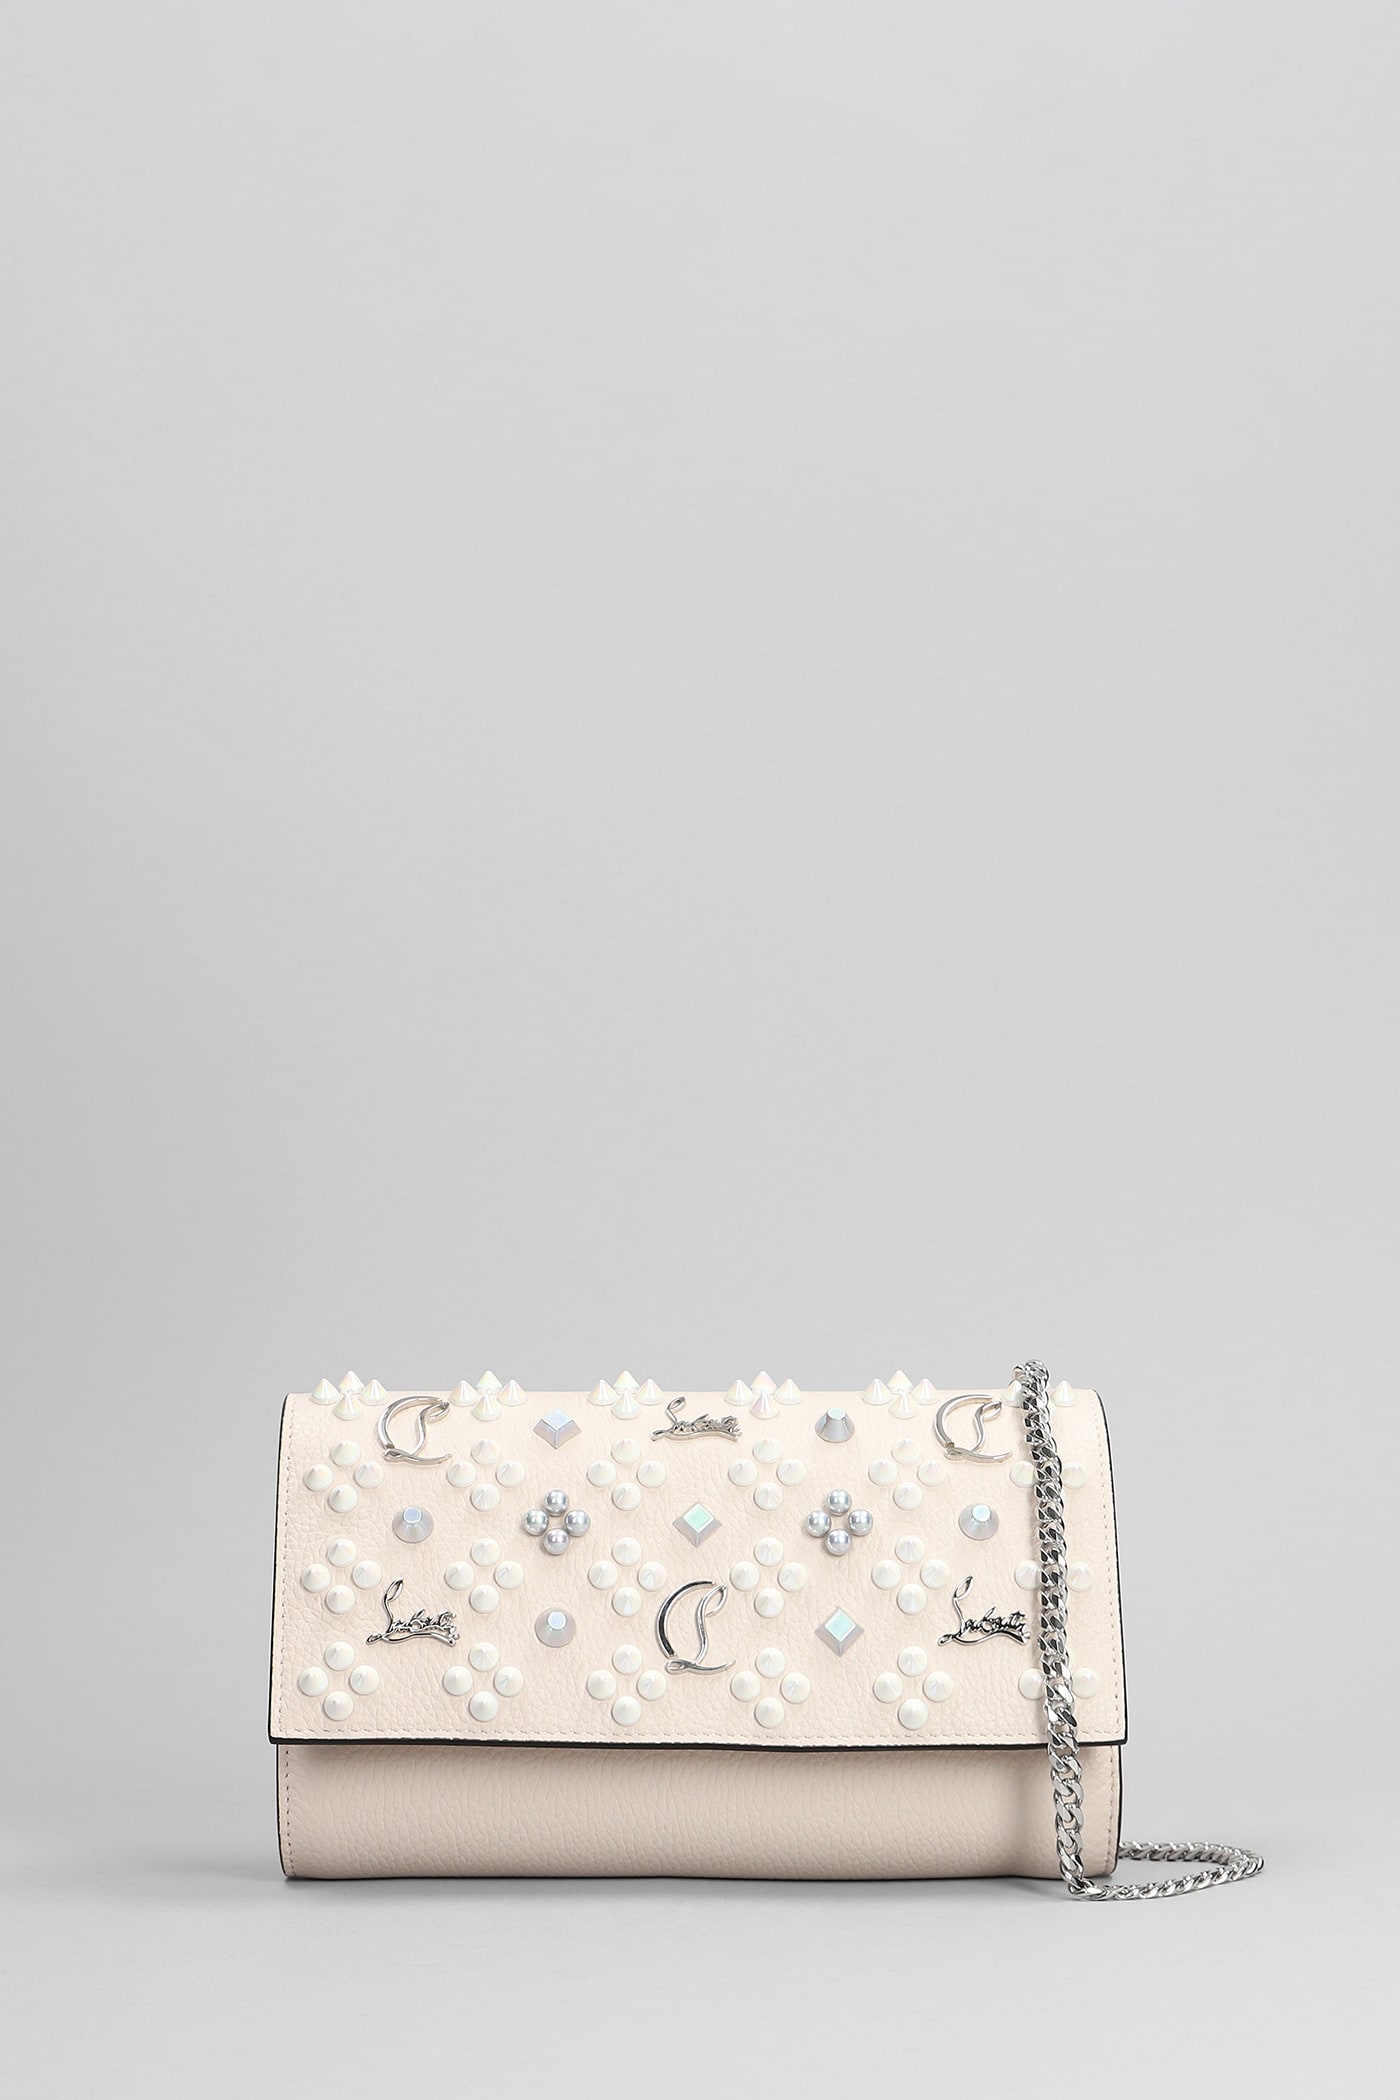 CHRISTIAN LOUBOUTIN PALOMA WALLET IN ROSE-PINK LEATHER